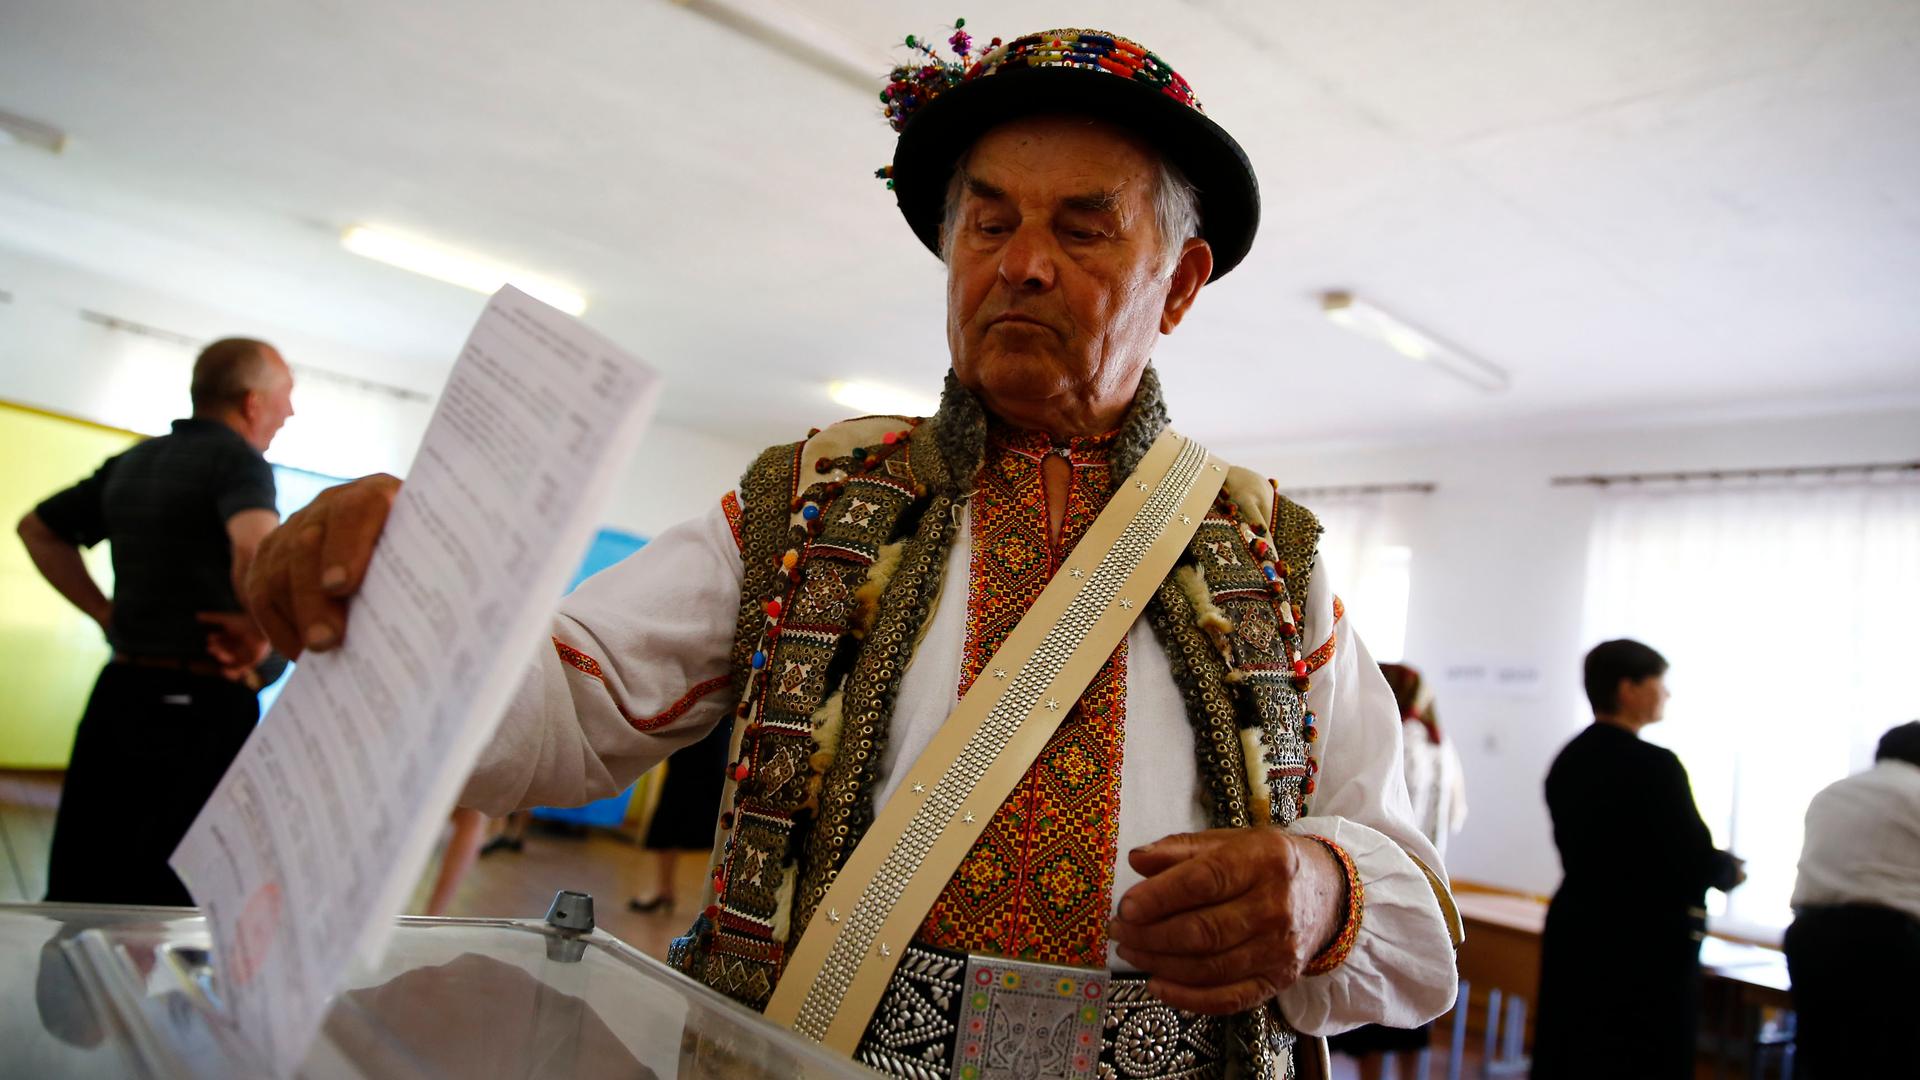 A man casts his vote in a presidential election at a polling station in the village of Kosmach in the Ivano-Frankivsk region of western Ukraine May 25, 2014. Ukrainians voted on Sunday in a presidential election billed as the most important since they won